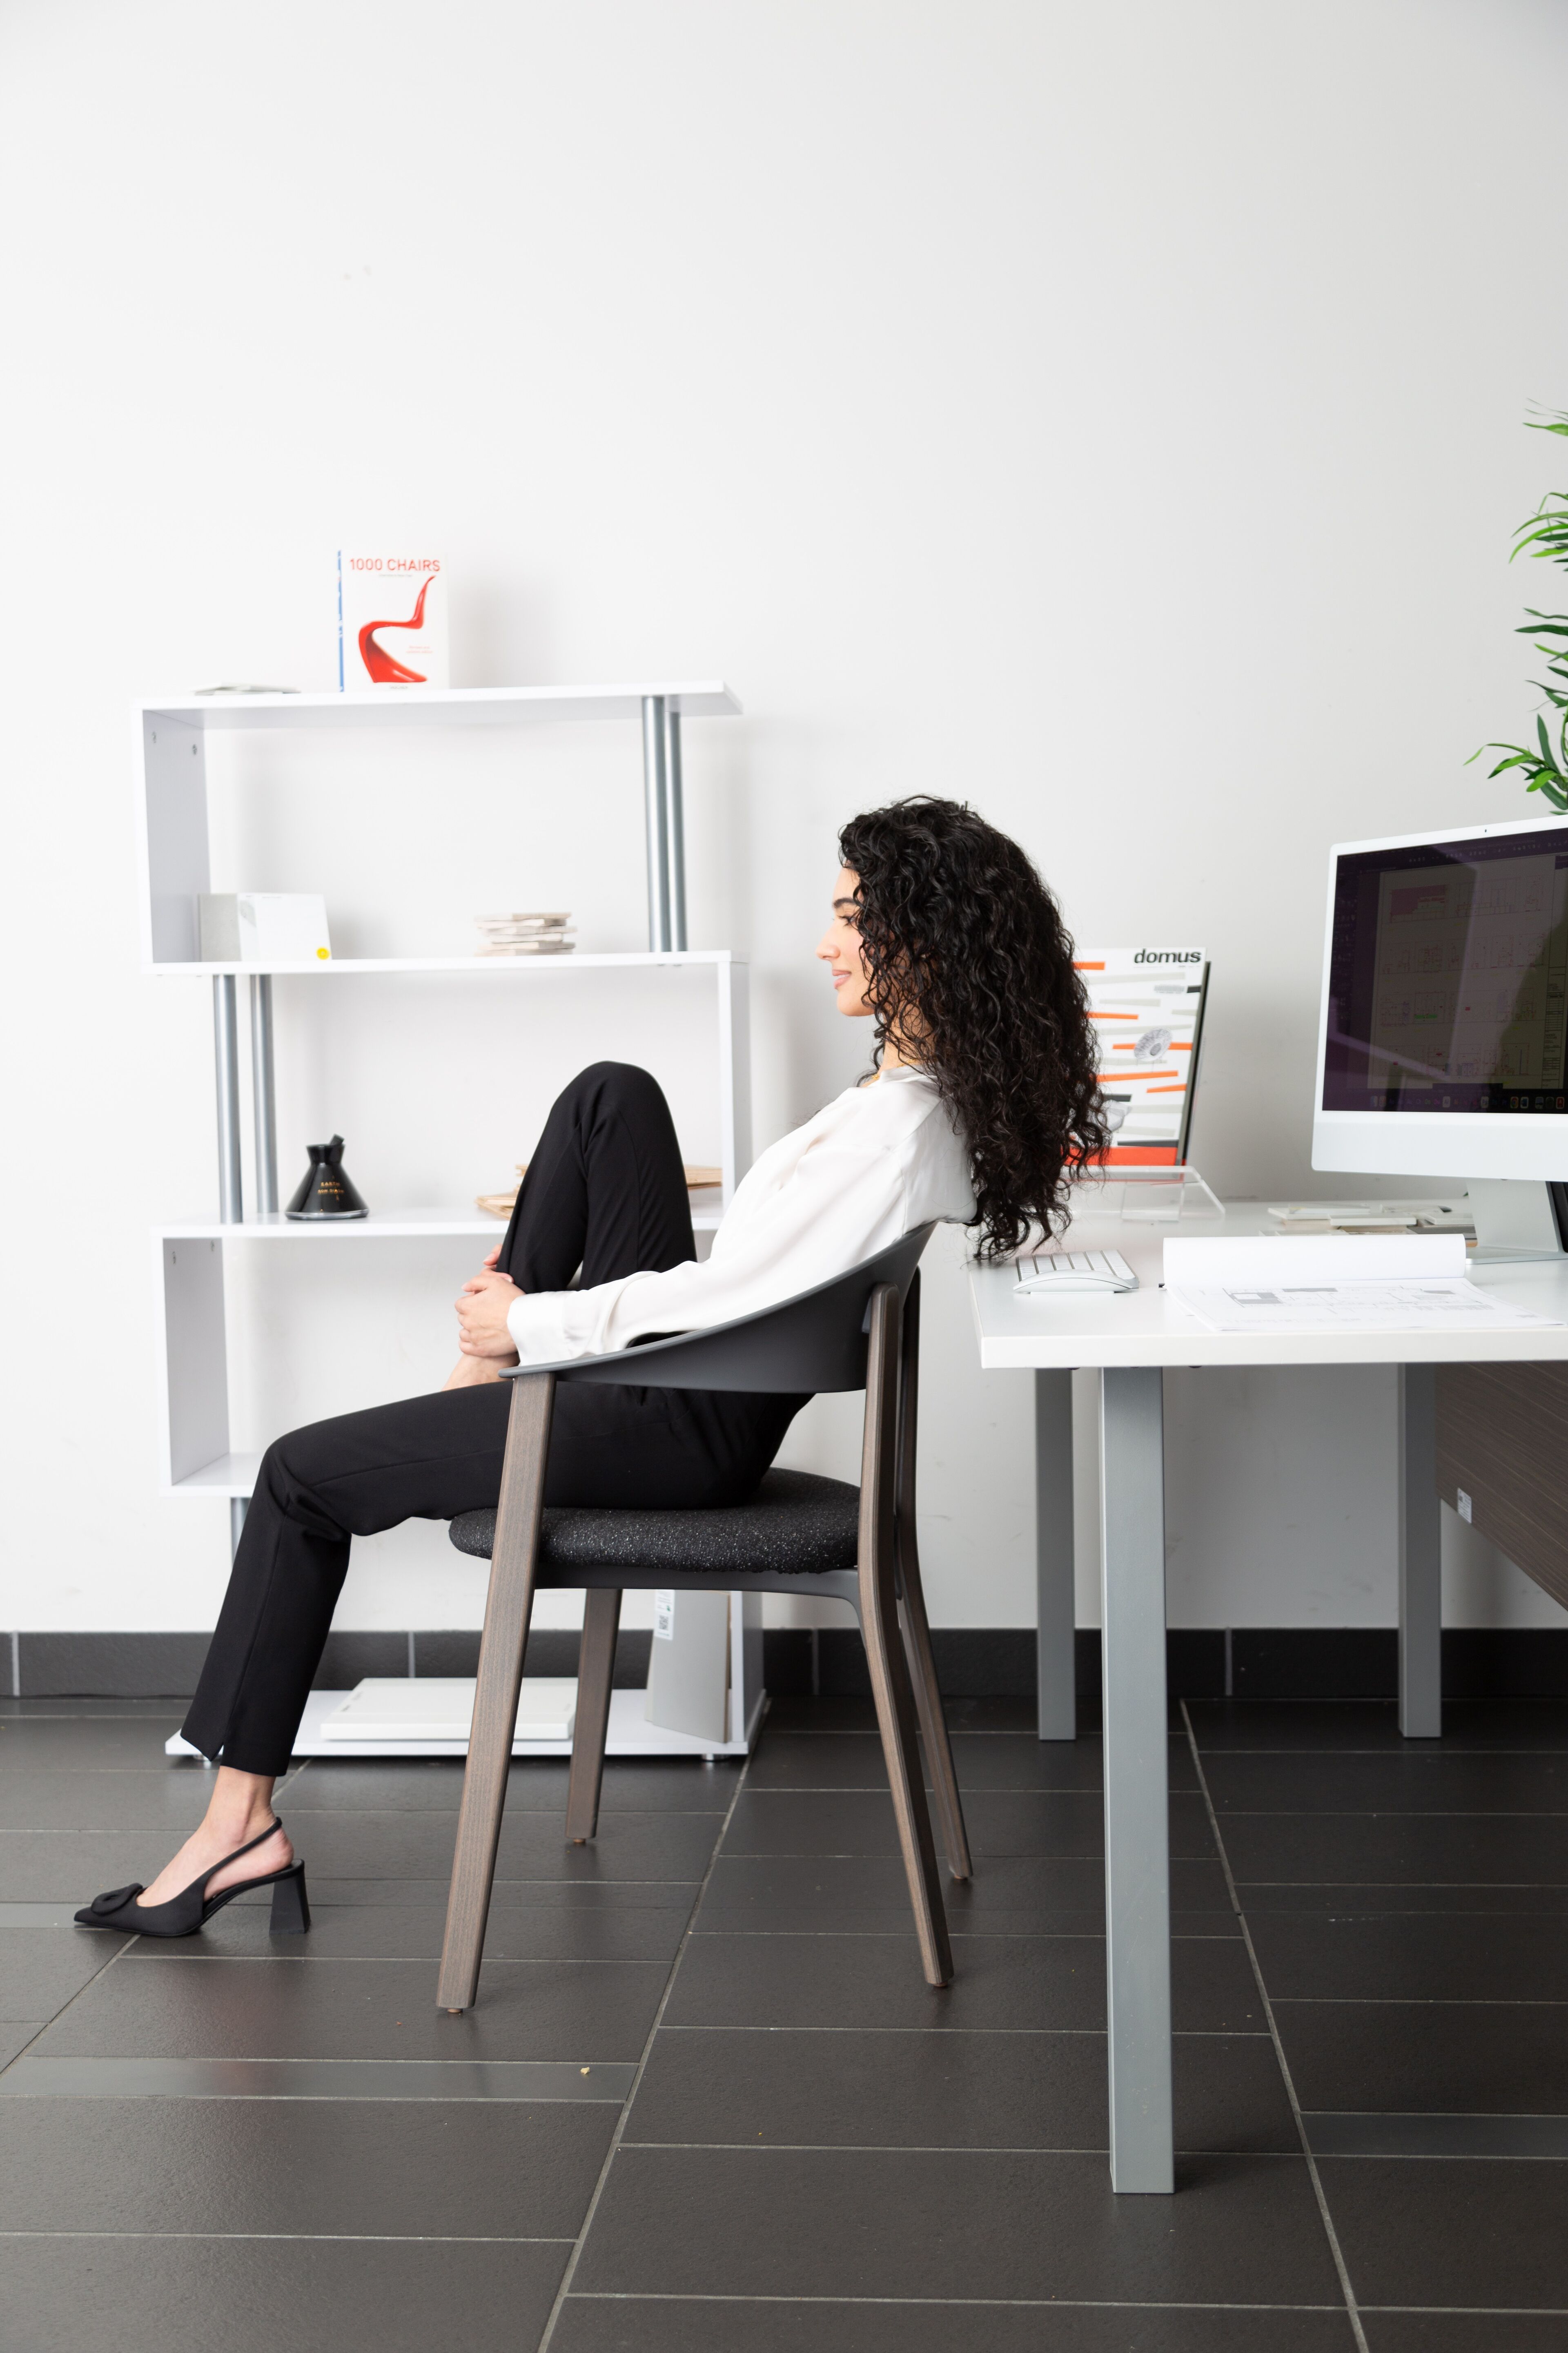 A professional woman sits sideways on a chair at a minimalist office, facing a white shelf and looking away from a computer screen.